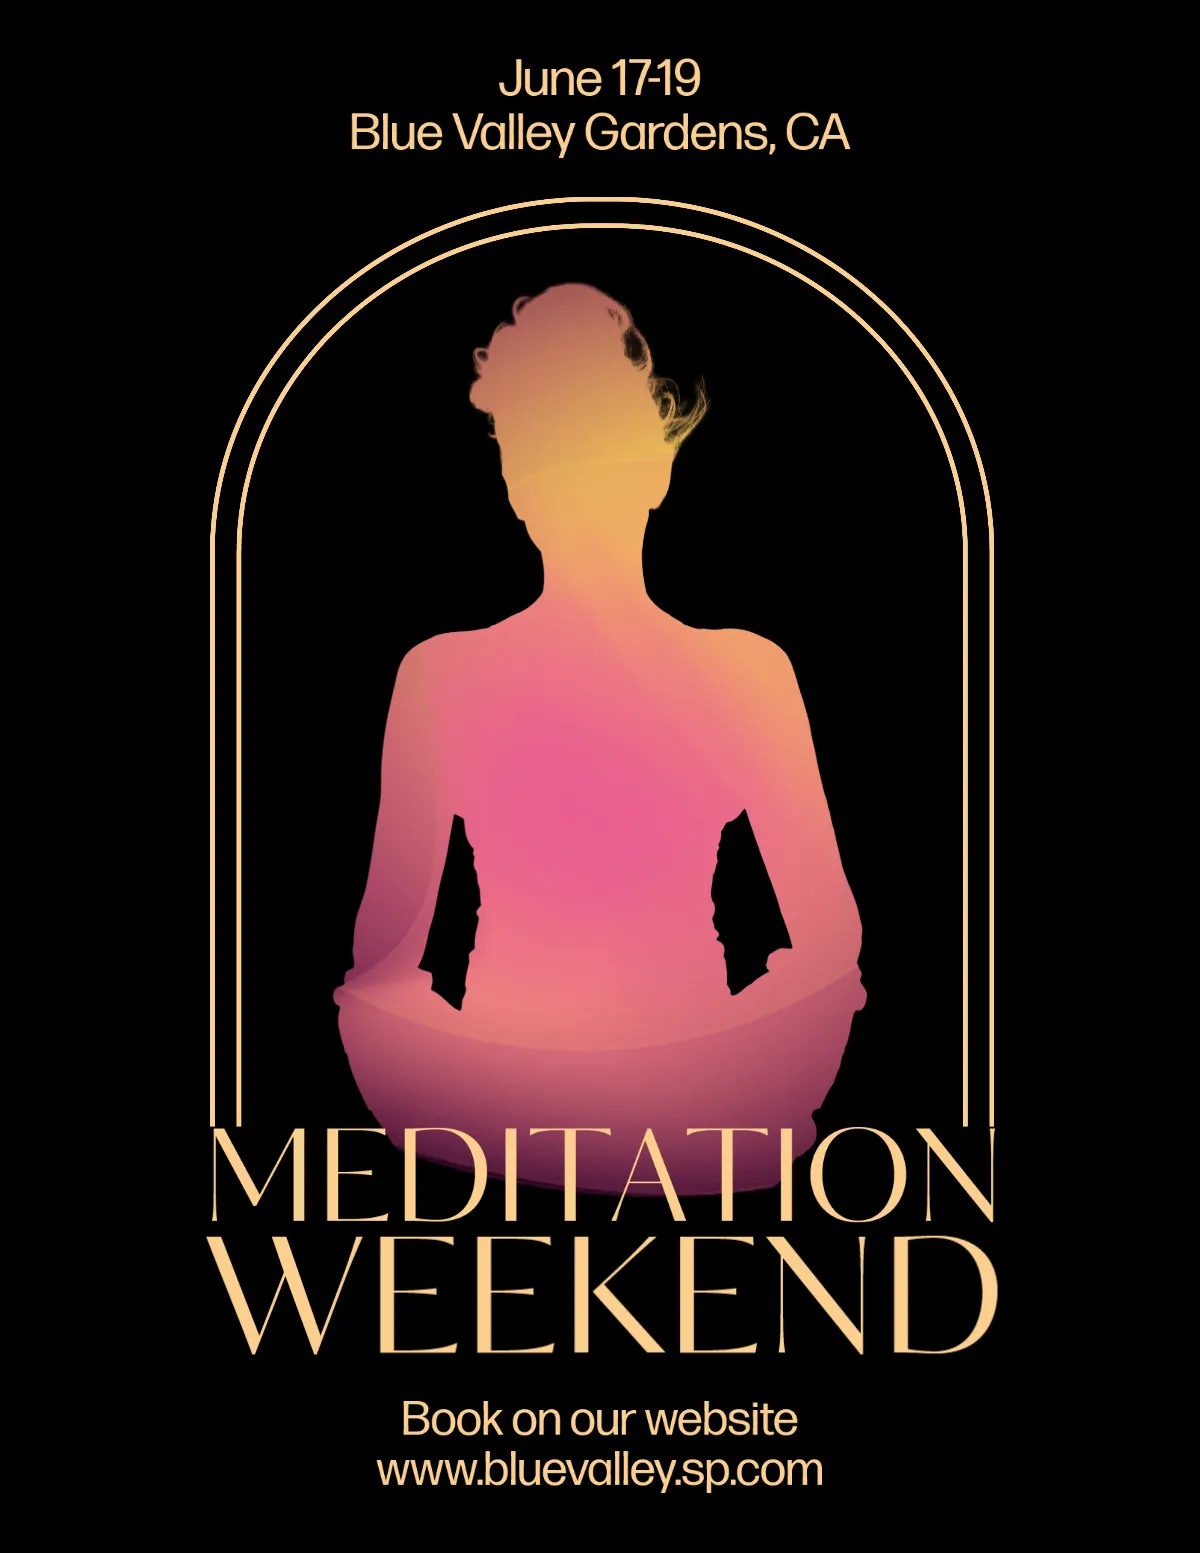 Gold and Black Woman Silhouette Elegant Meditation Weekend Flyer